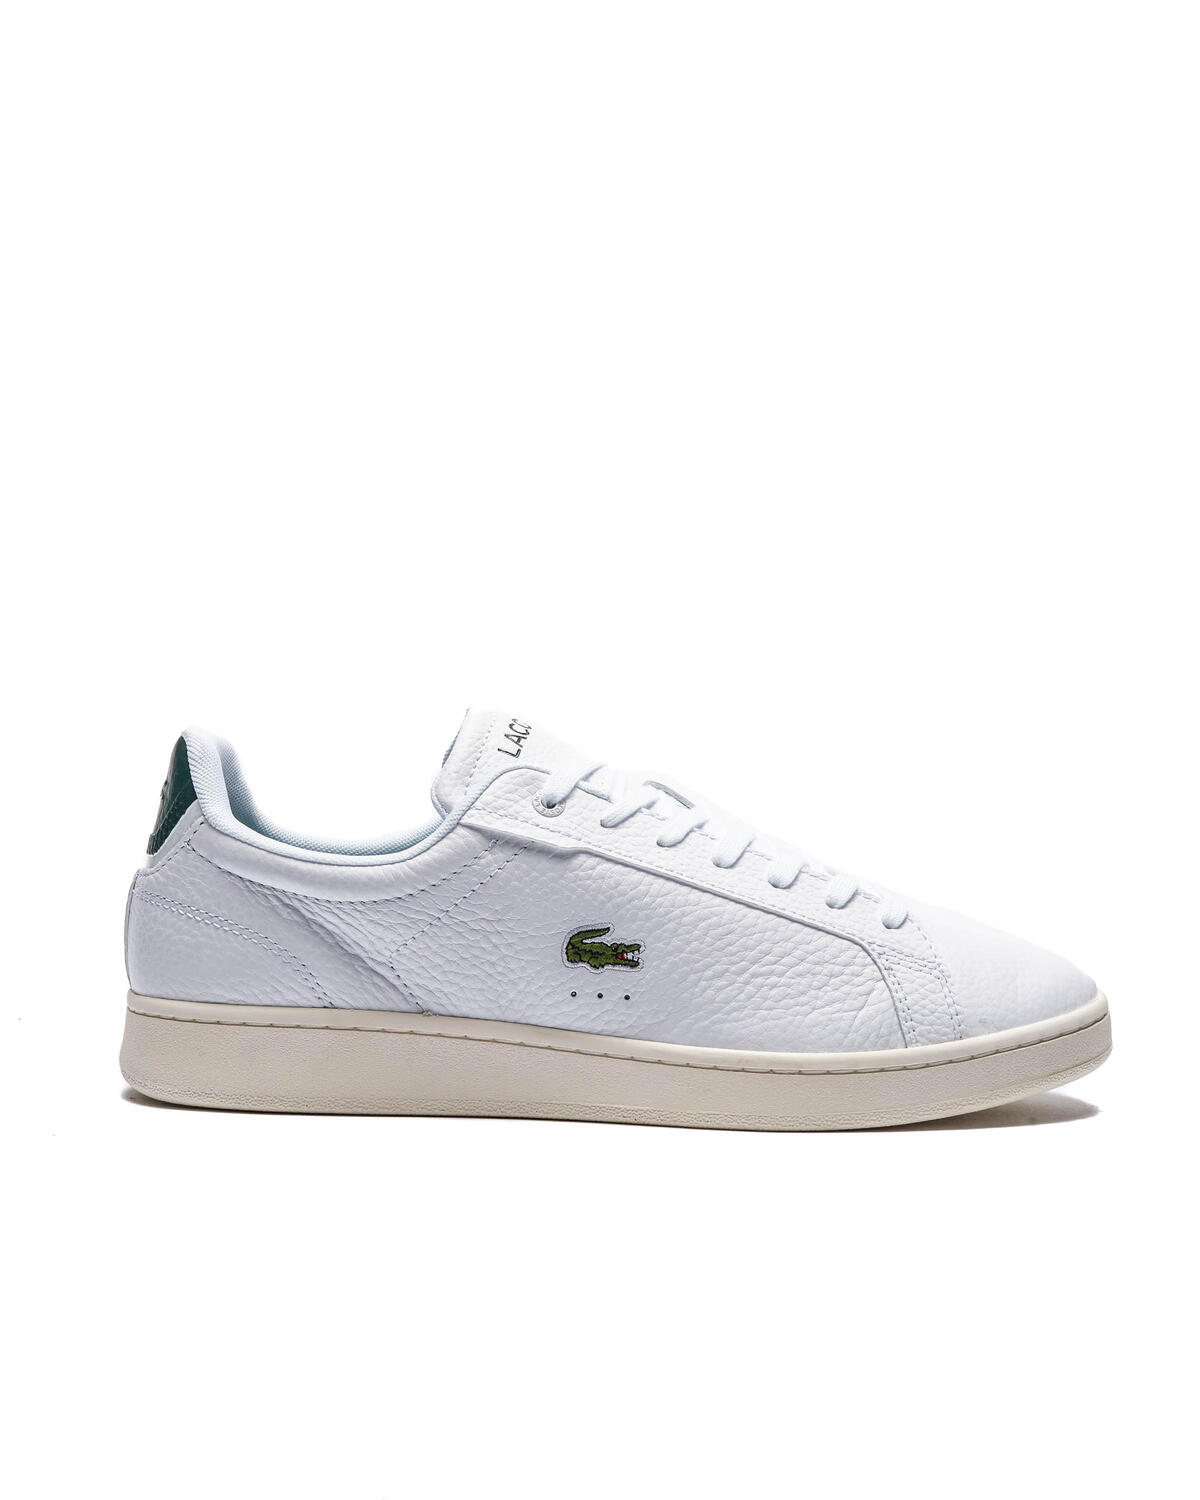 lacoste carnaby pro 222 1 sma